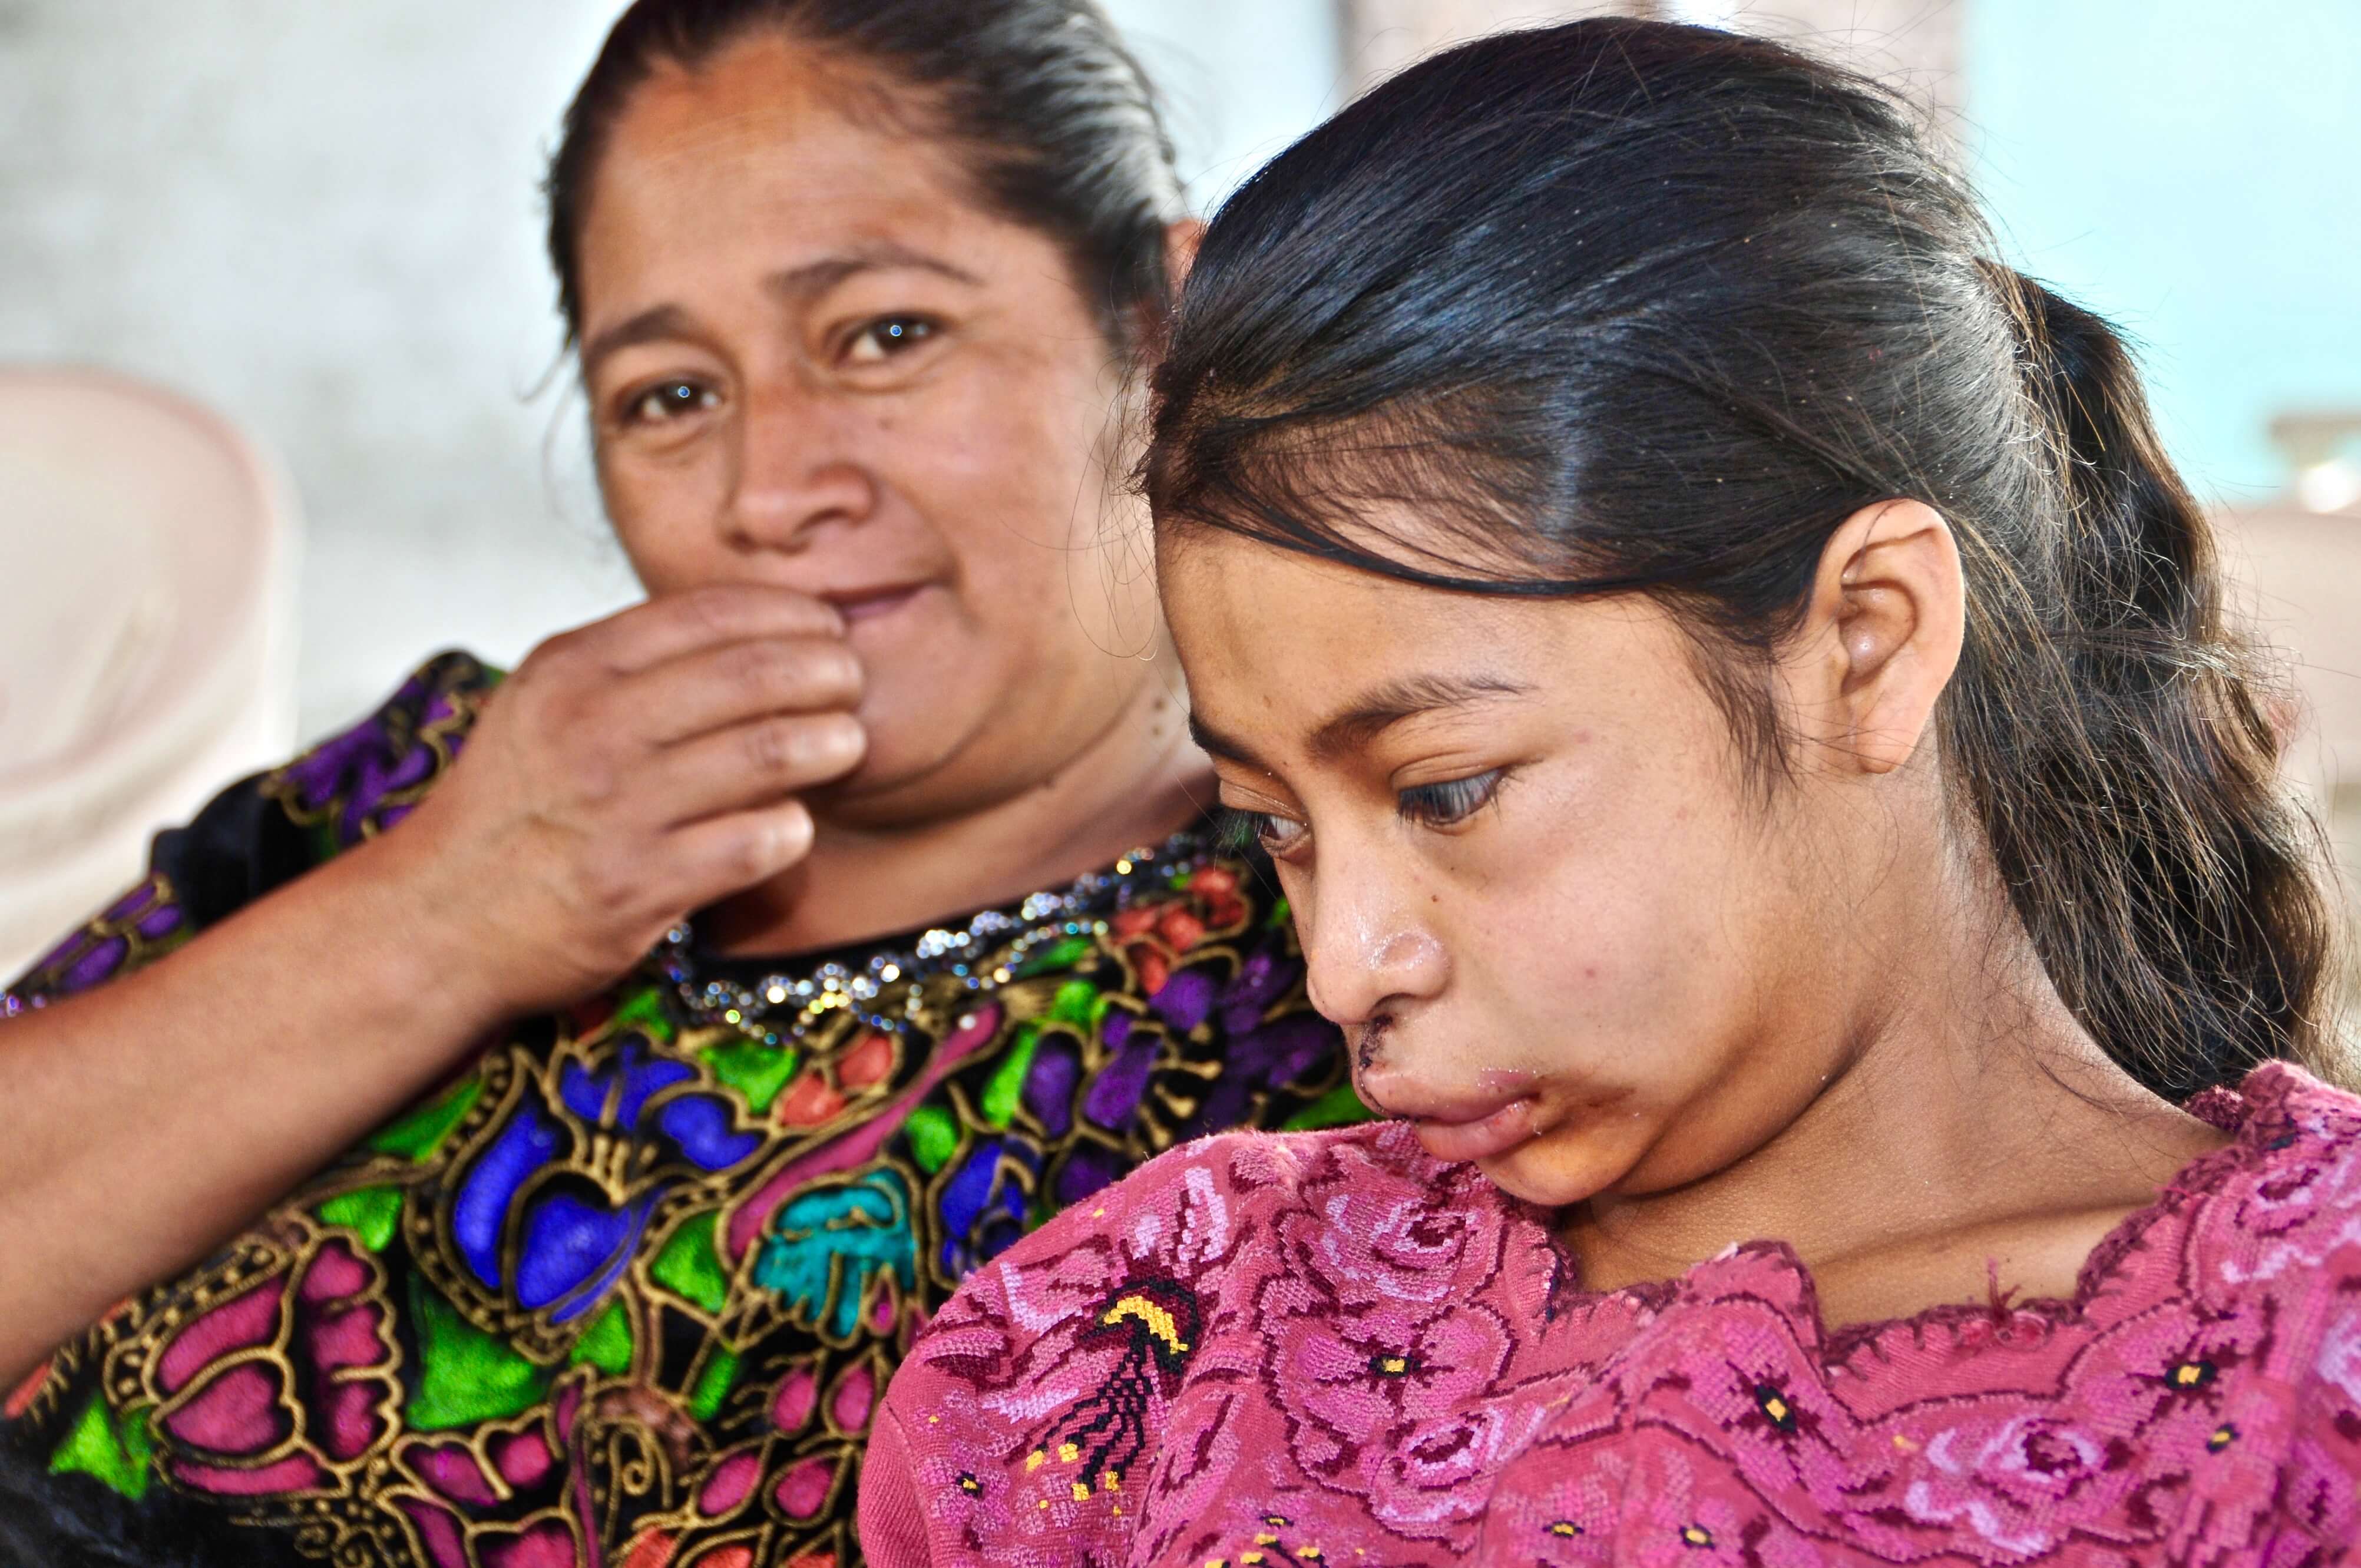 Angelica and her mom waiting to be seen by doctors a week after her surgery.